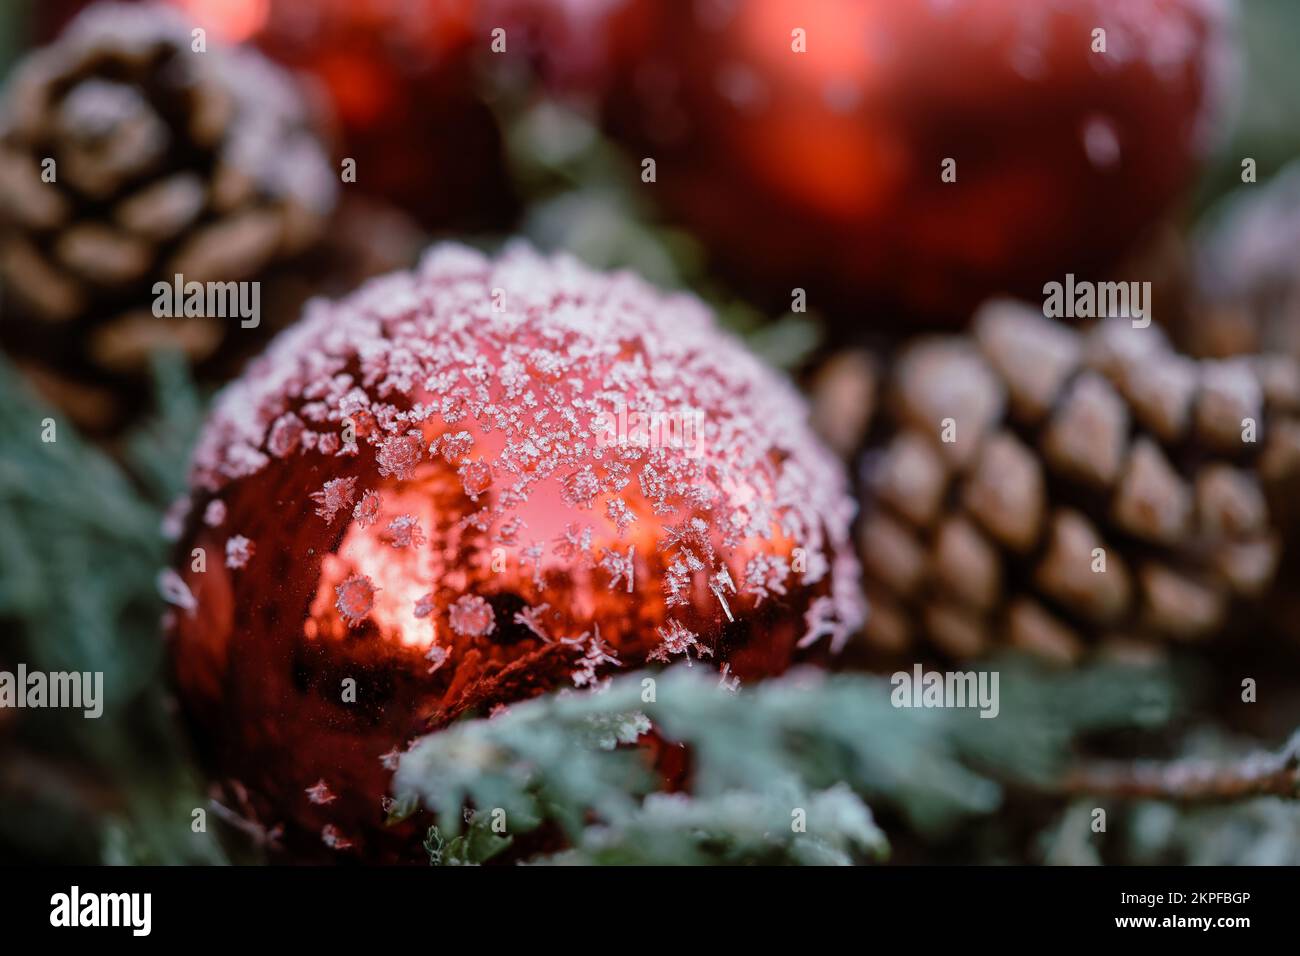 A red Christmas ball covered in snowflakes Stock Photo